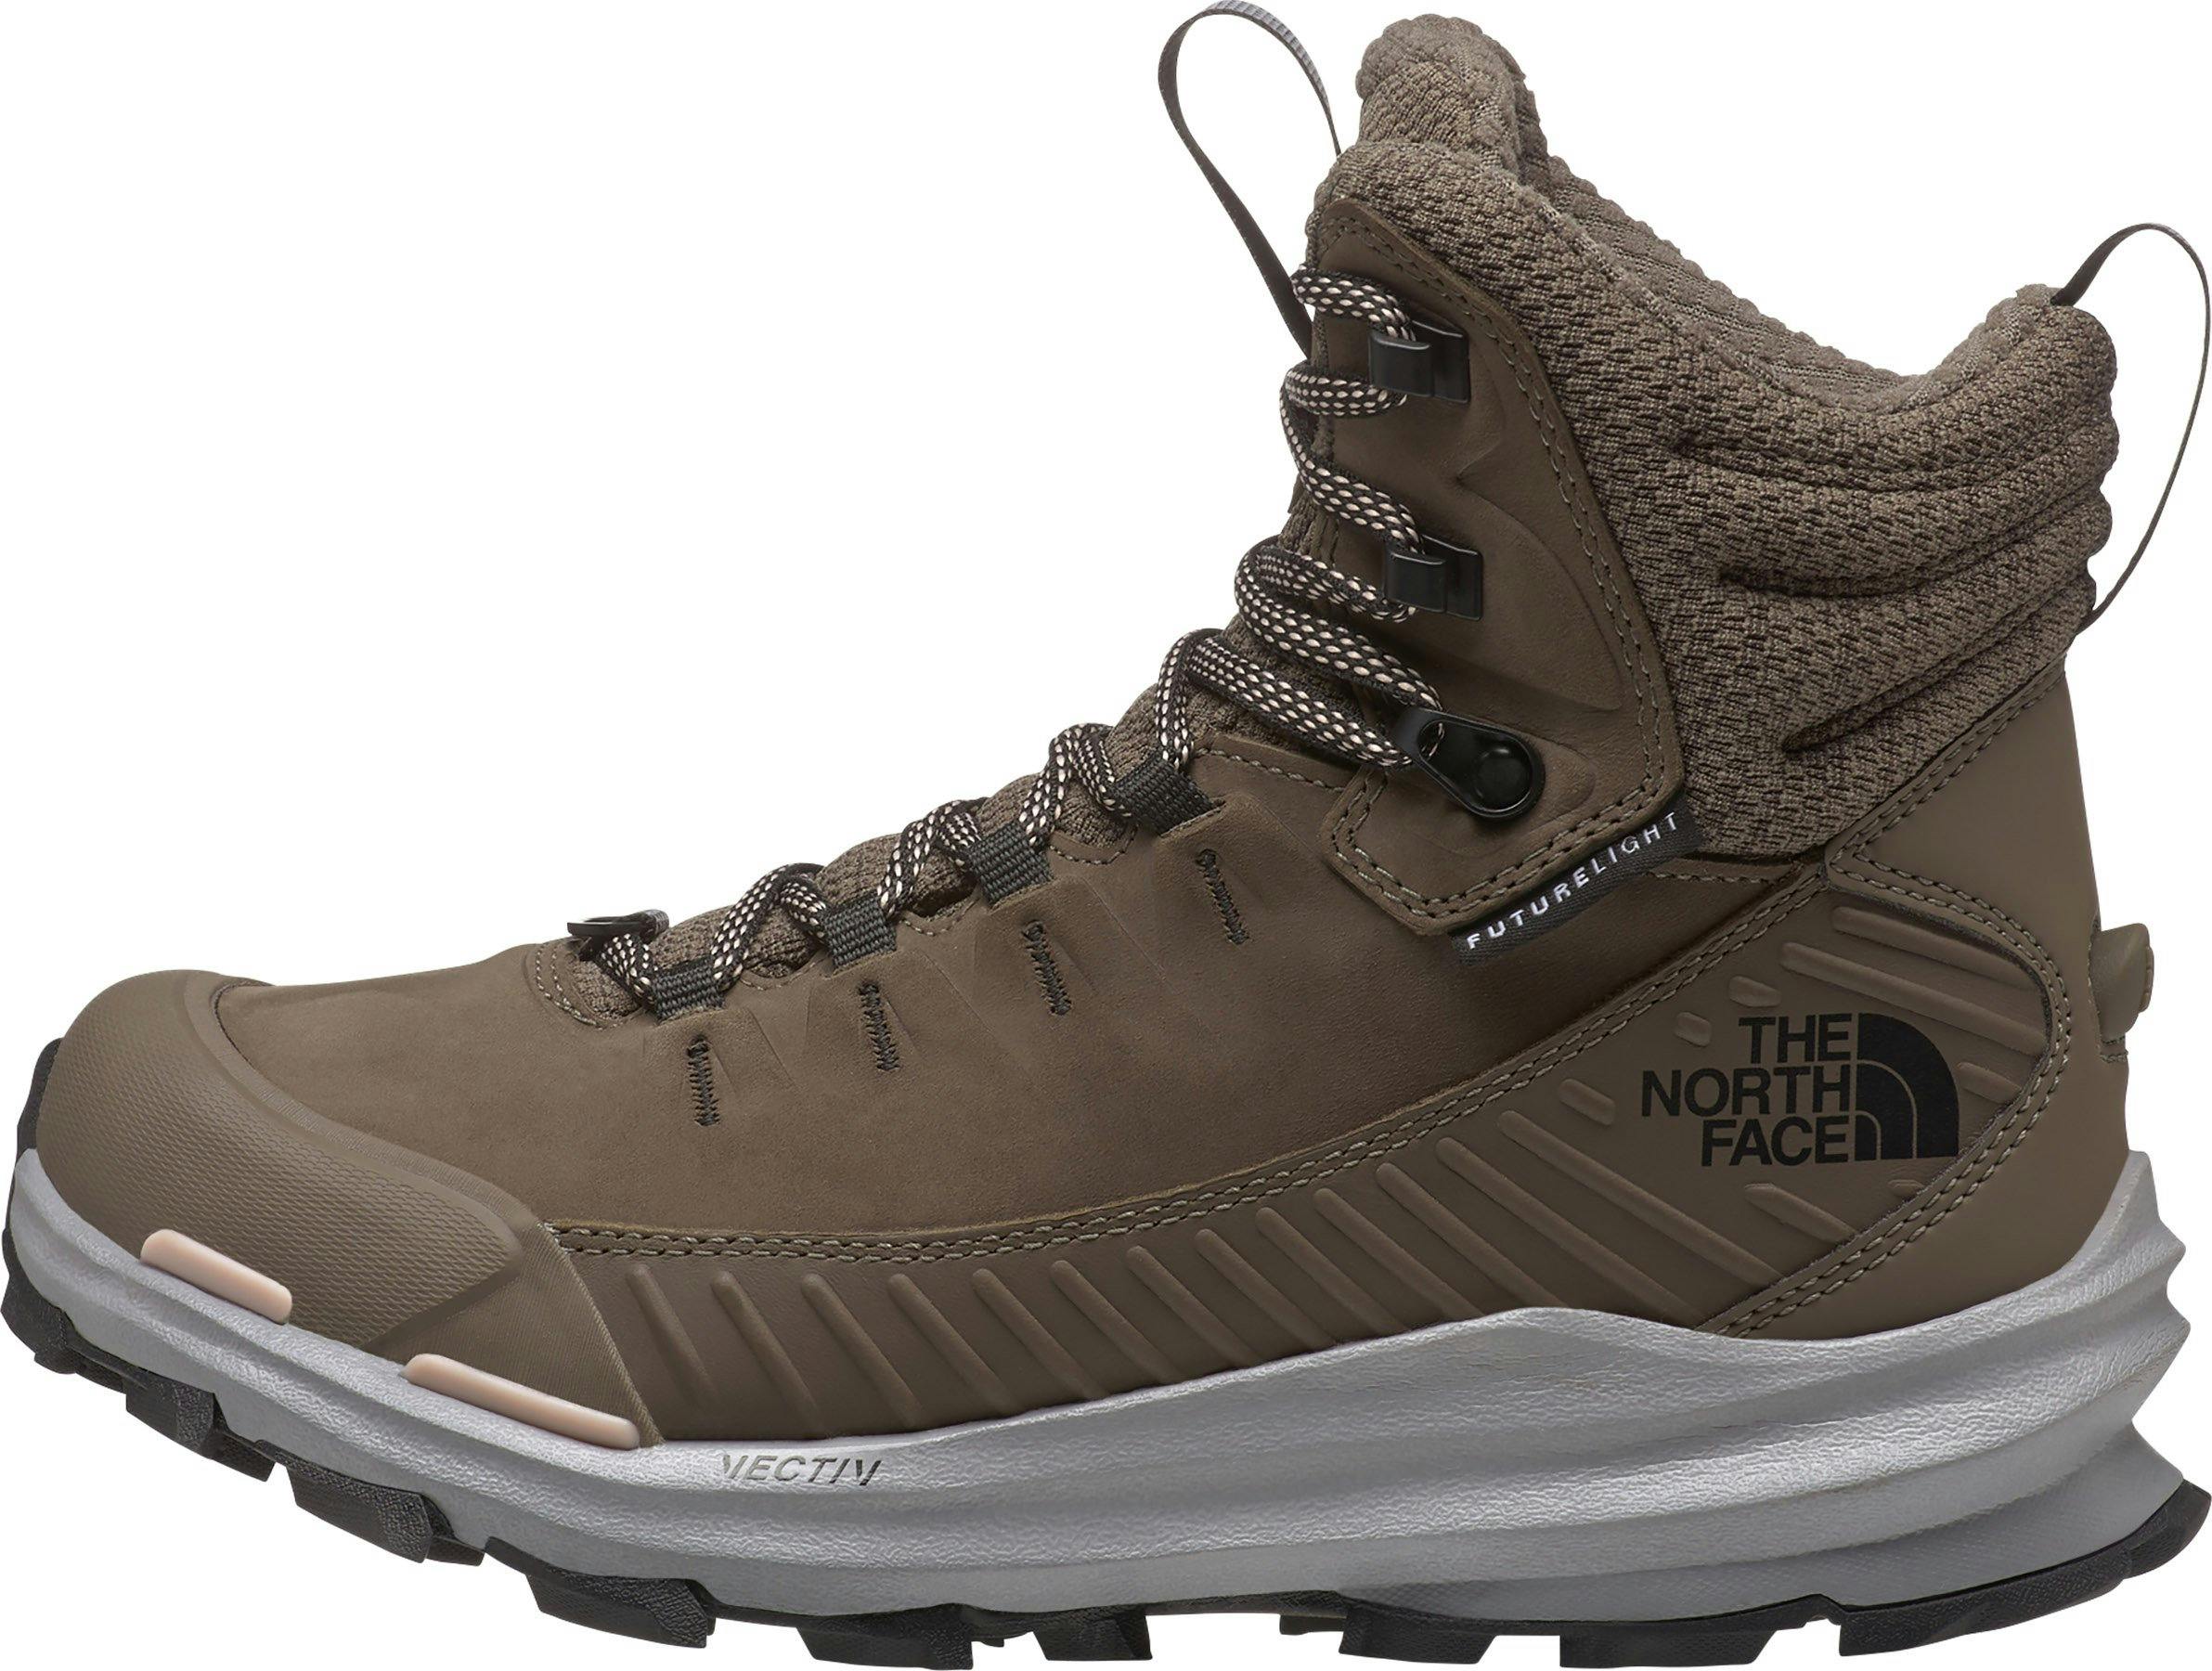 Product image for Vectiv Fastpack Insulated Futurelight Boots - Women’s